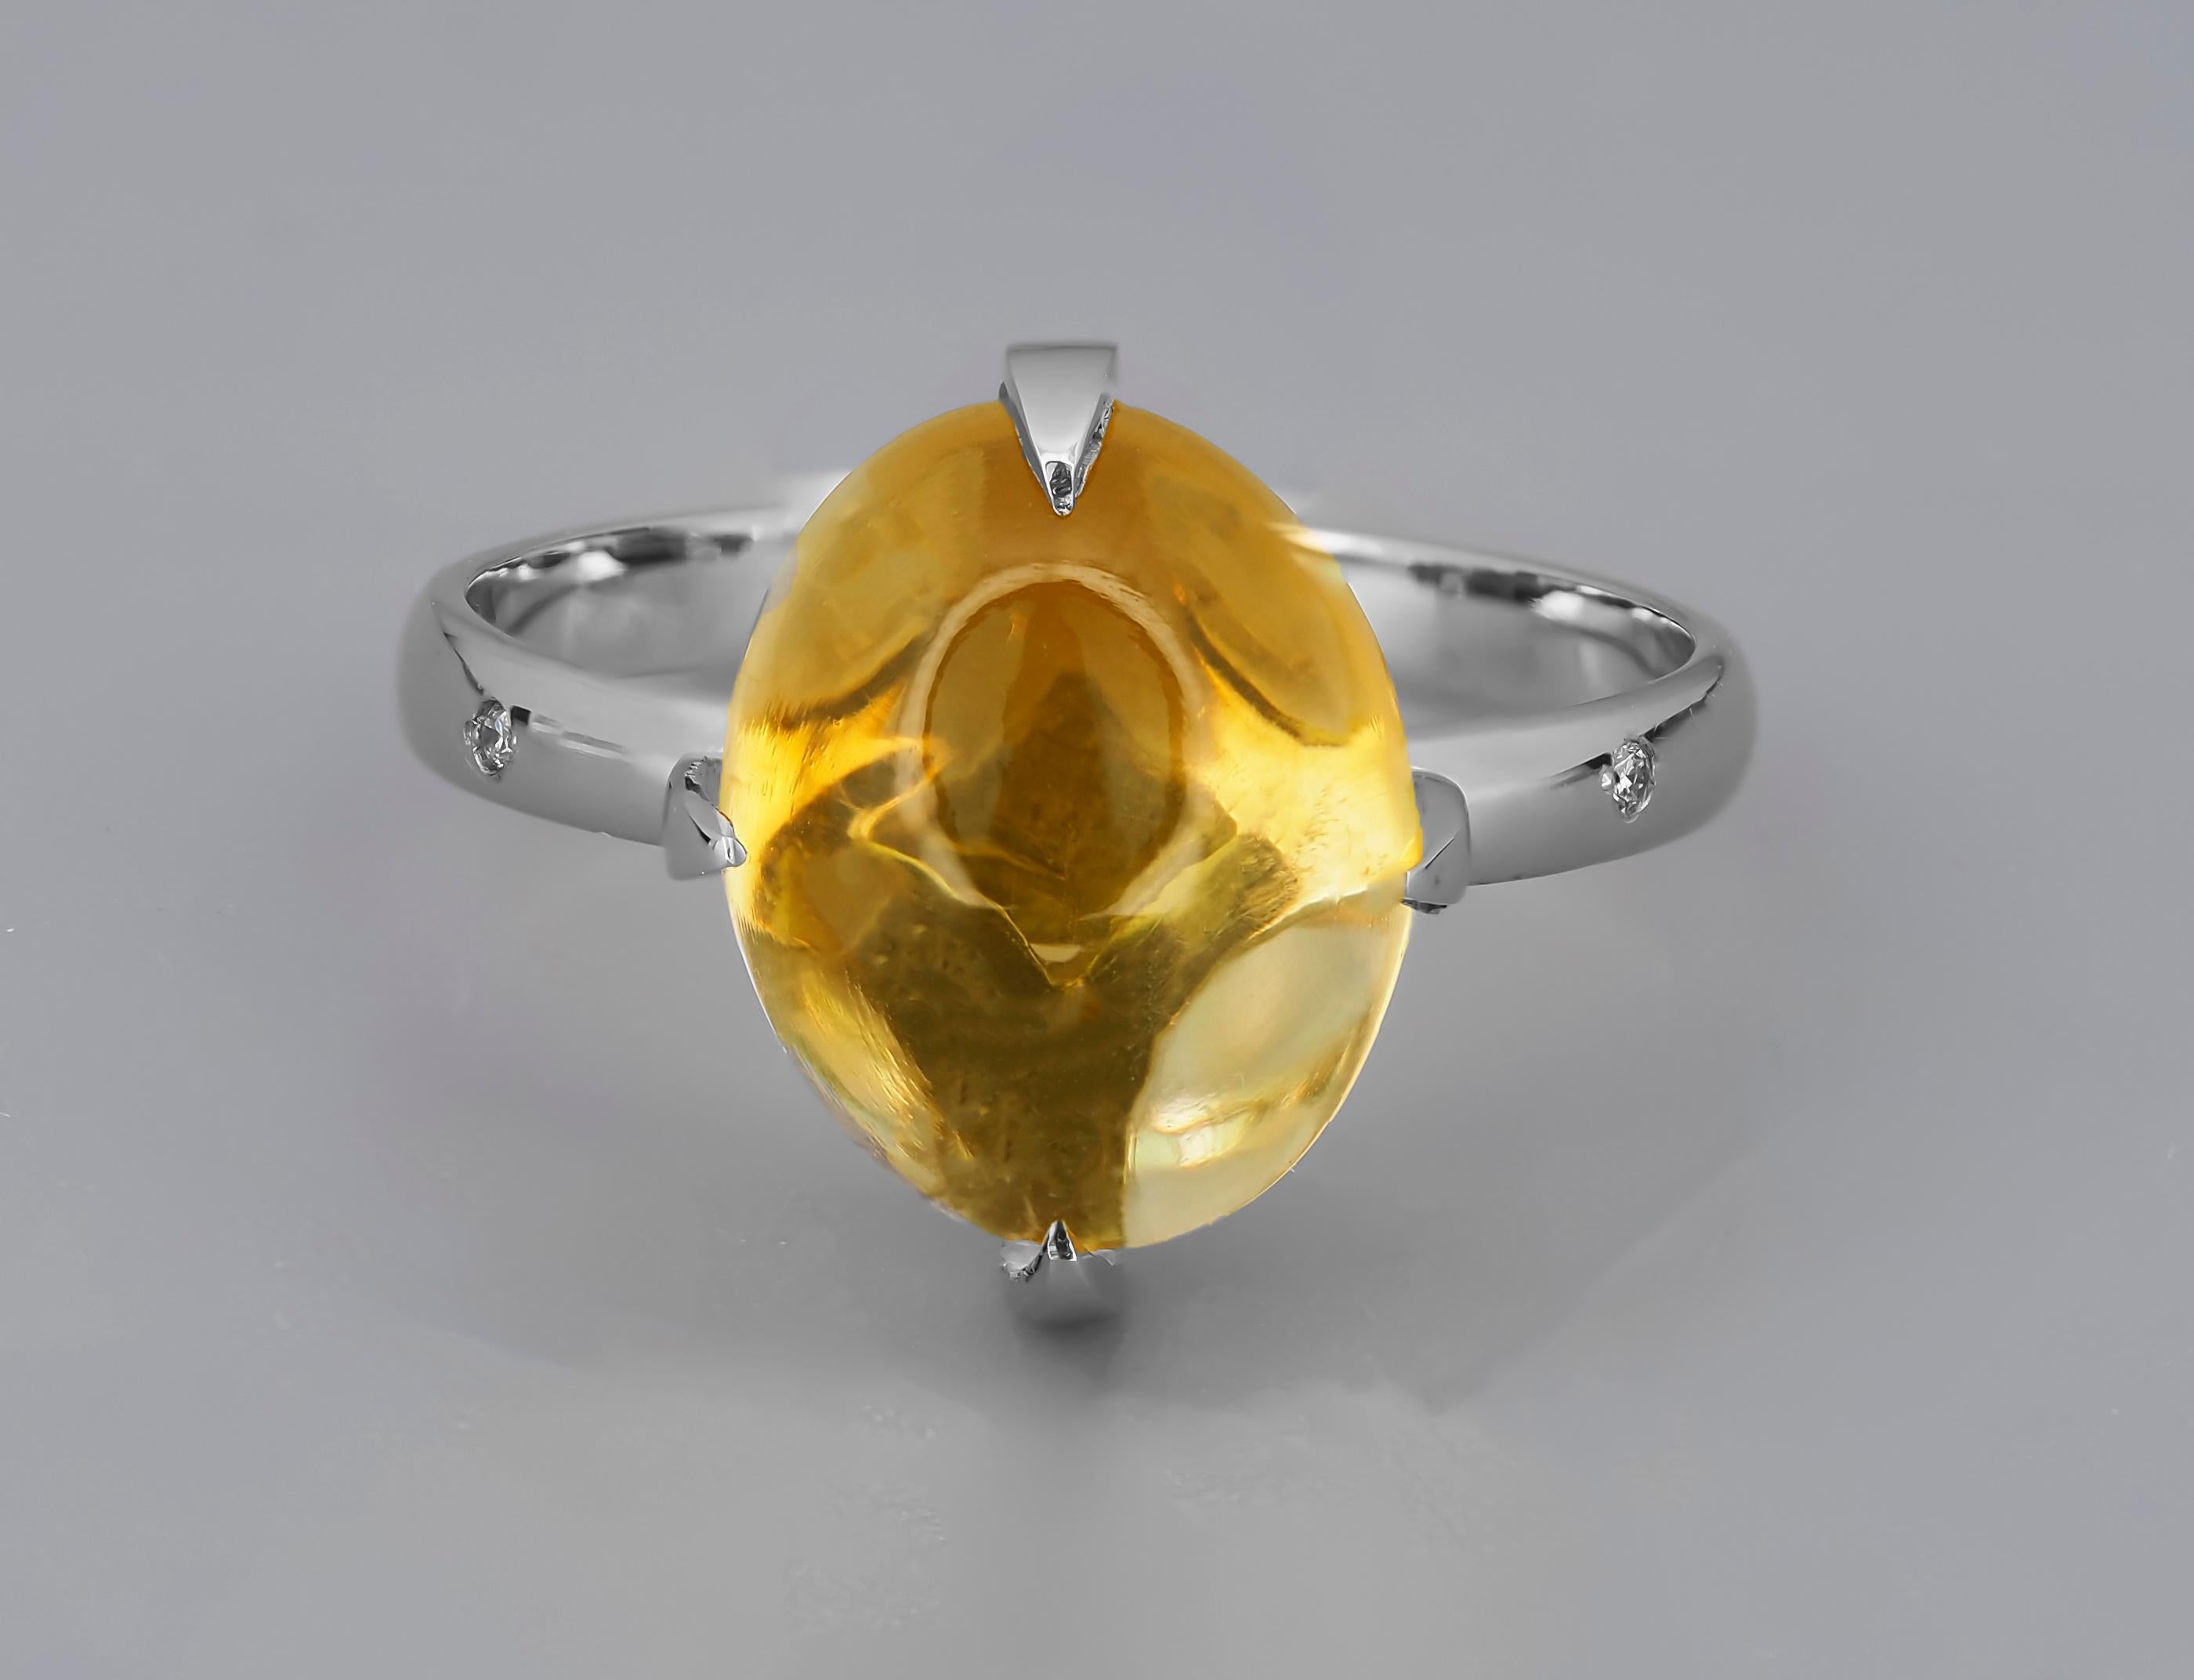 Ring with citrine cabochon and diamonds. 

Genuine citrine ring. Citrine cabochon ring. Novemver birthstone ring.

Metal: sterling silver 
Weight: 3 g depends from sizr

Set with citrine.
4.9ct. oval cabochon cut
Colour: Yellow
Clarity: